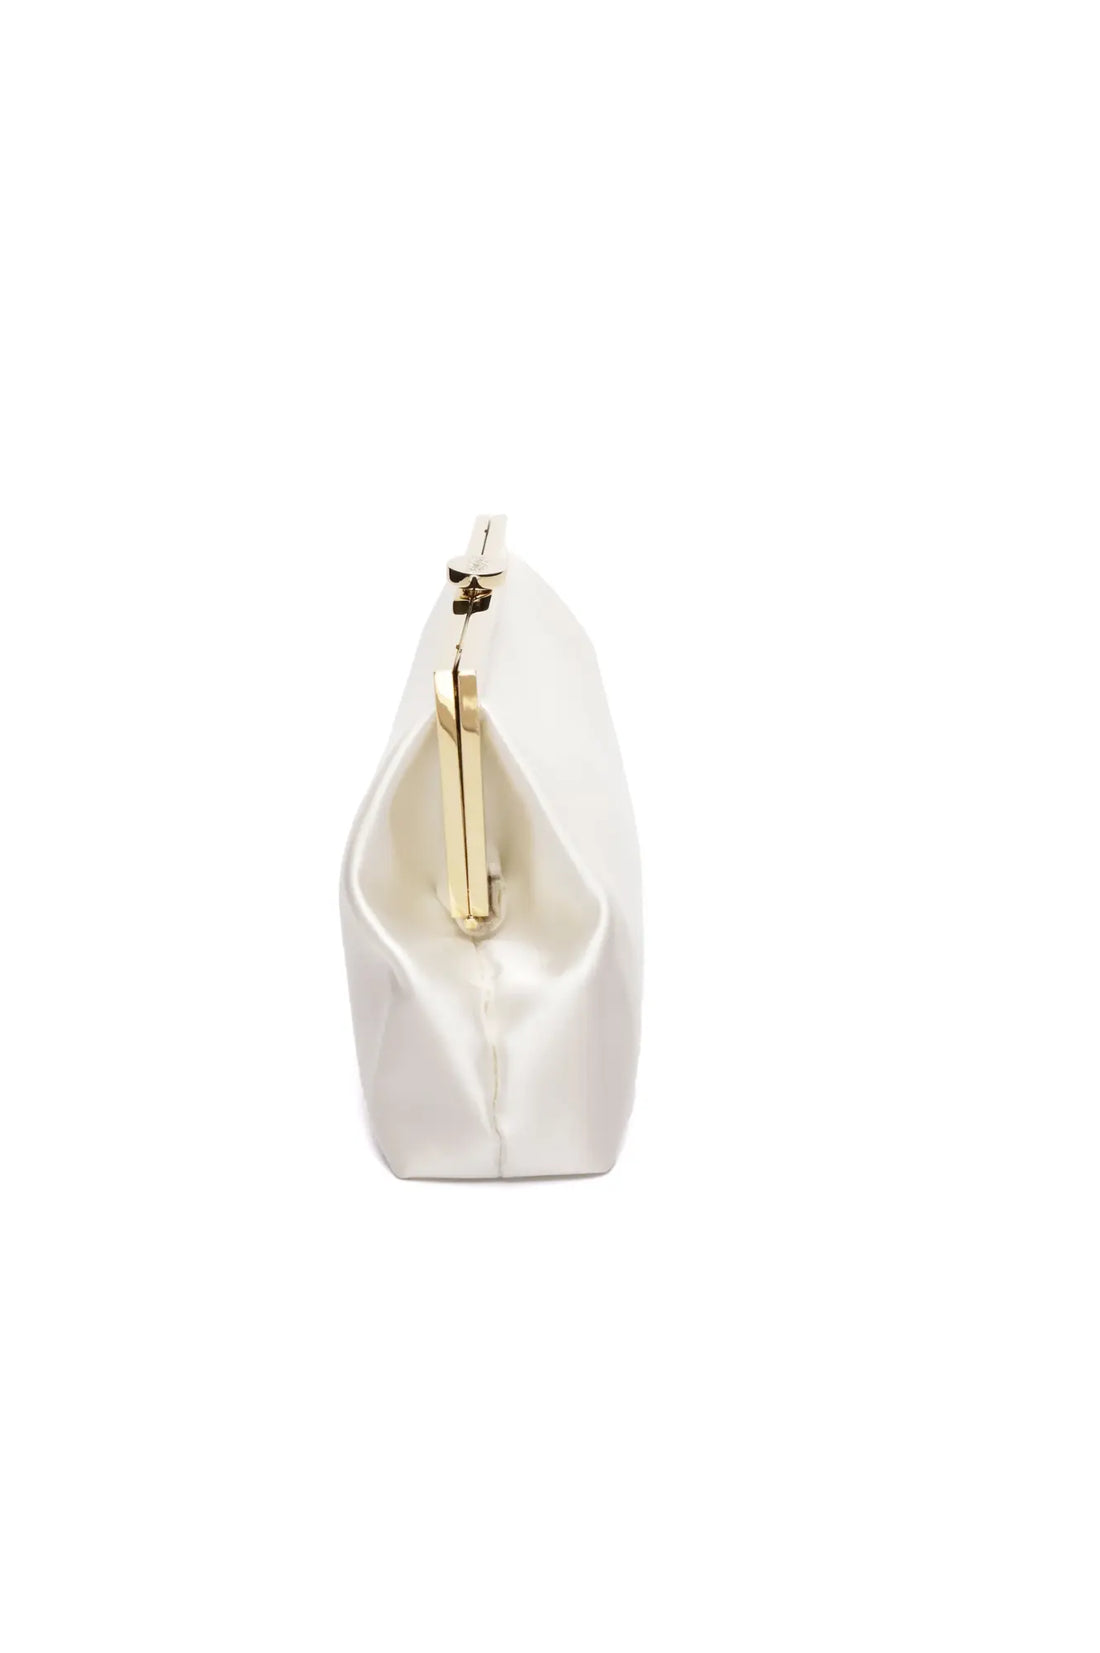 Italian Duchess Satin Rosa Clutch from The Bella Rosa Collection with gold zipper detail on a white background.